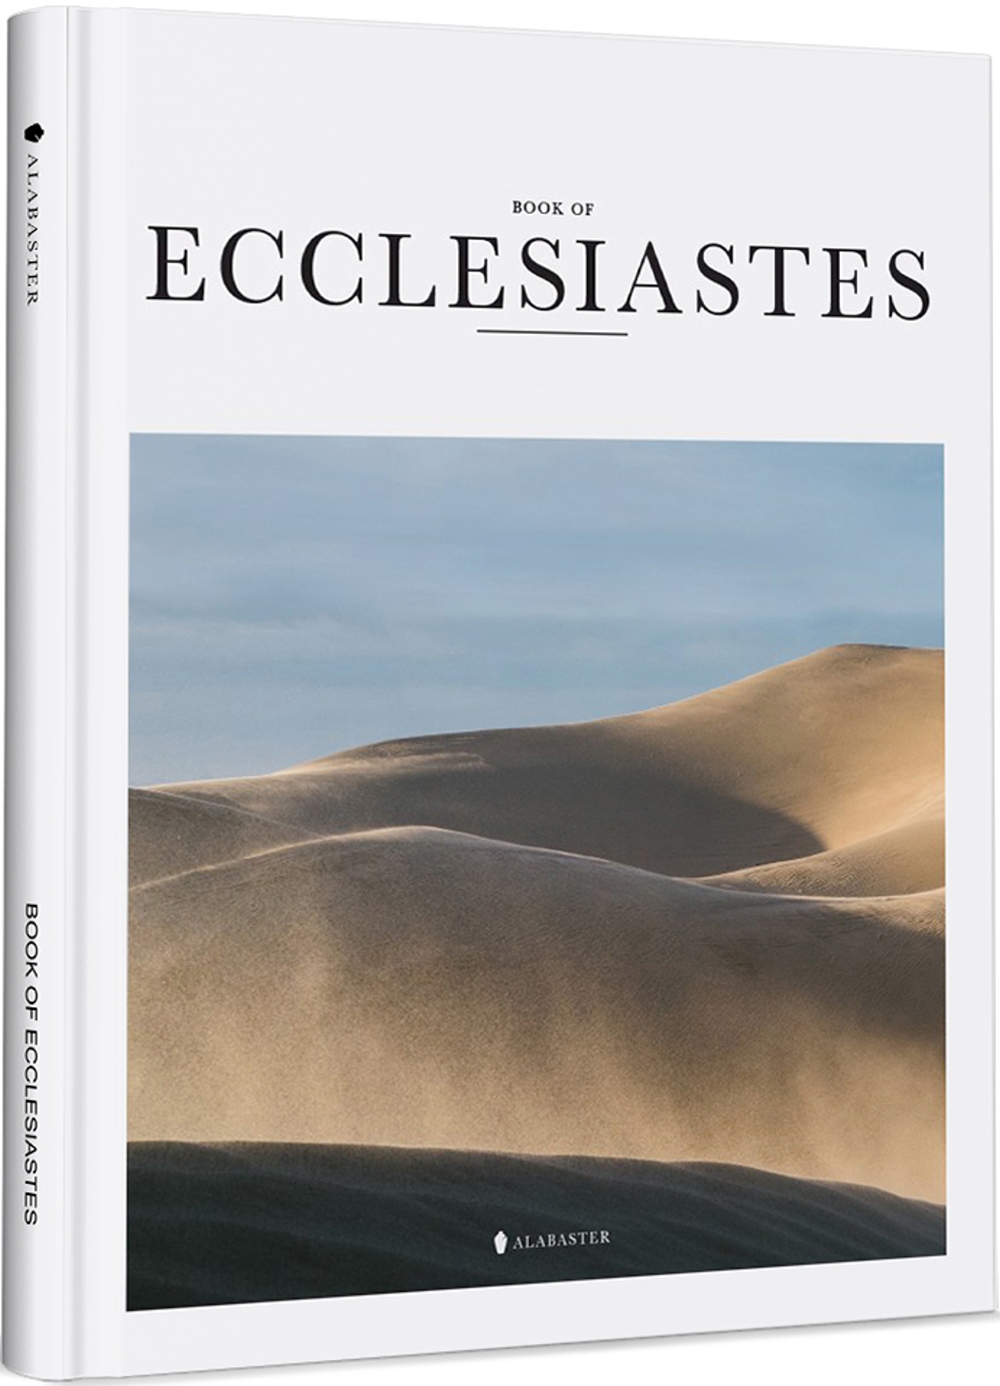 BOOK OF ECCLESIASTES(New Living Translation)(Hardcover)